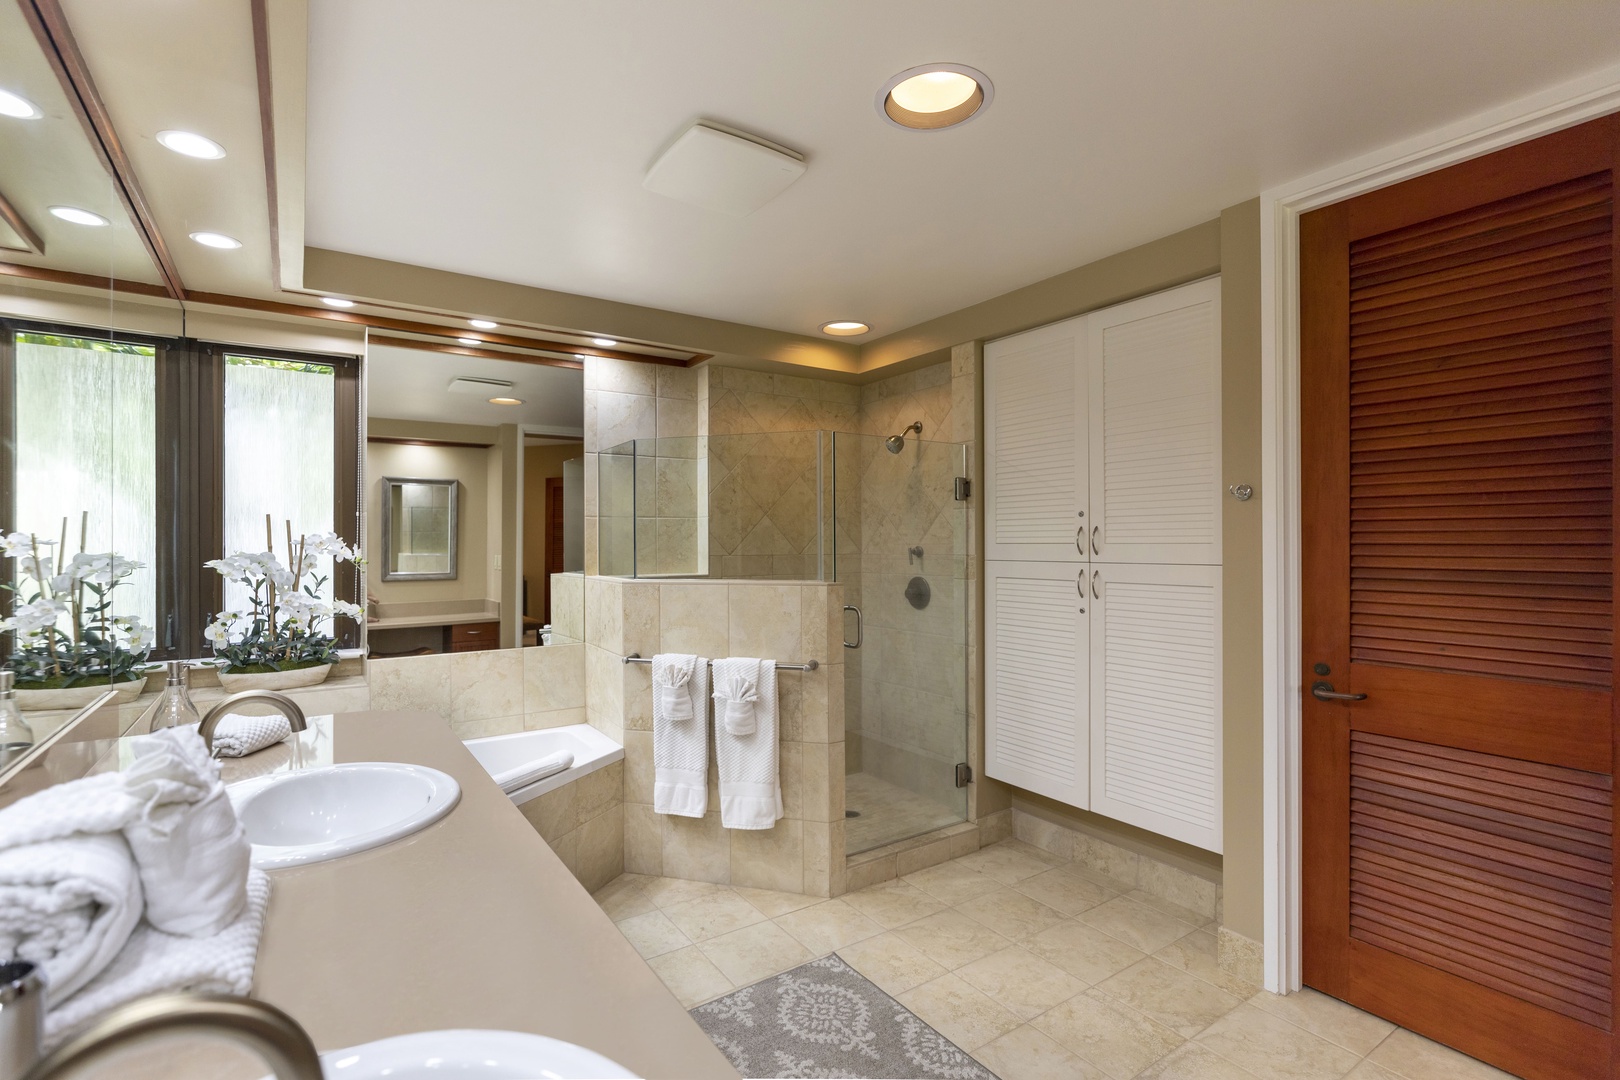 Kamuela Vacation Rentals, Mauna Lani Point E105 - The primary bath offers a walk-in shower and double vanities.